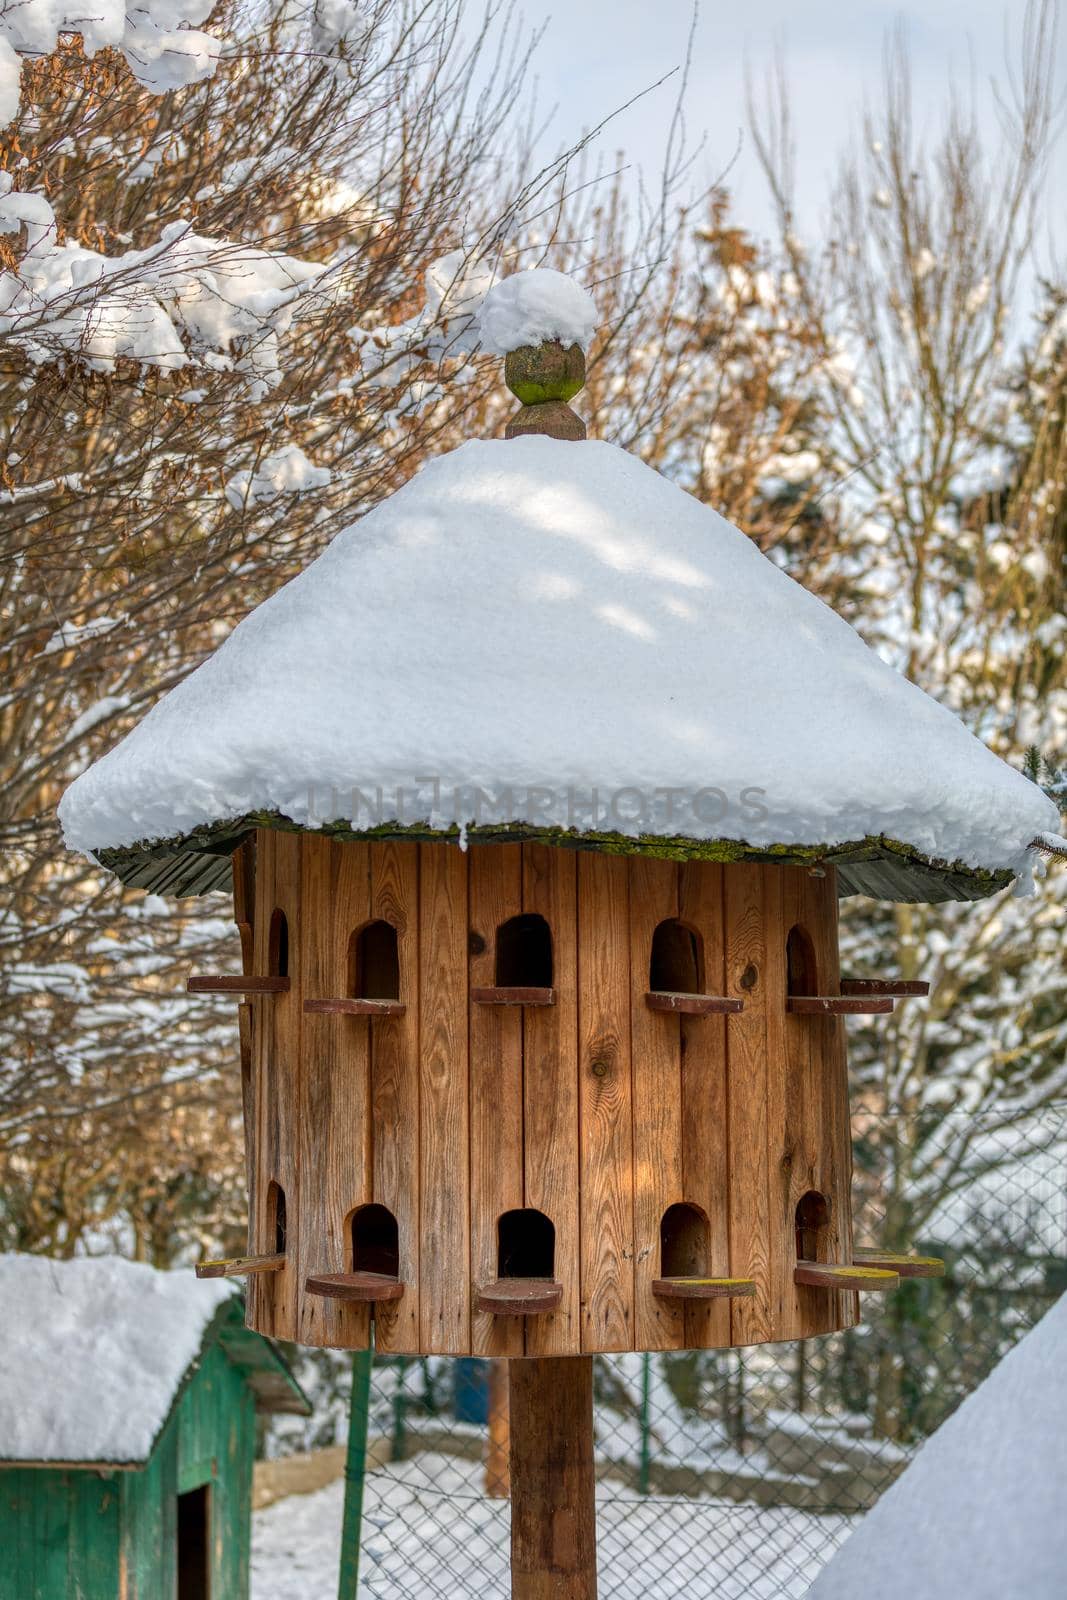 Wooden Dovecote with a roof cowered by snow, a house for pigeons made of wood in the garden as a nest for birds.